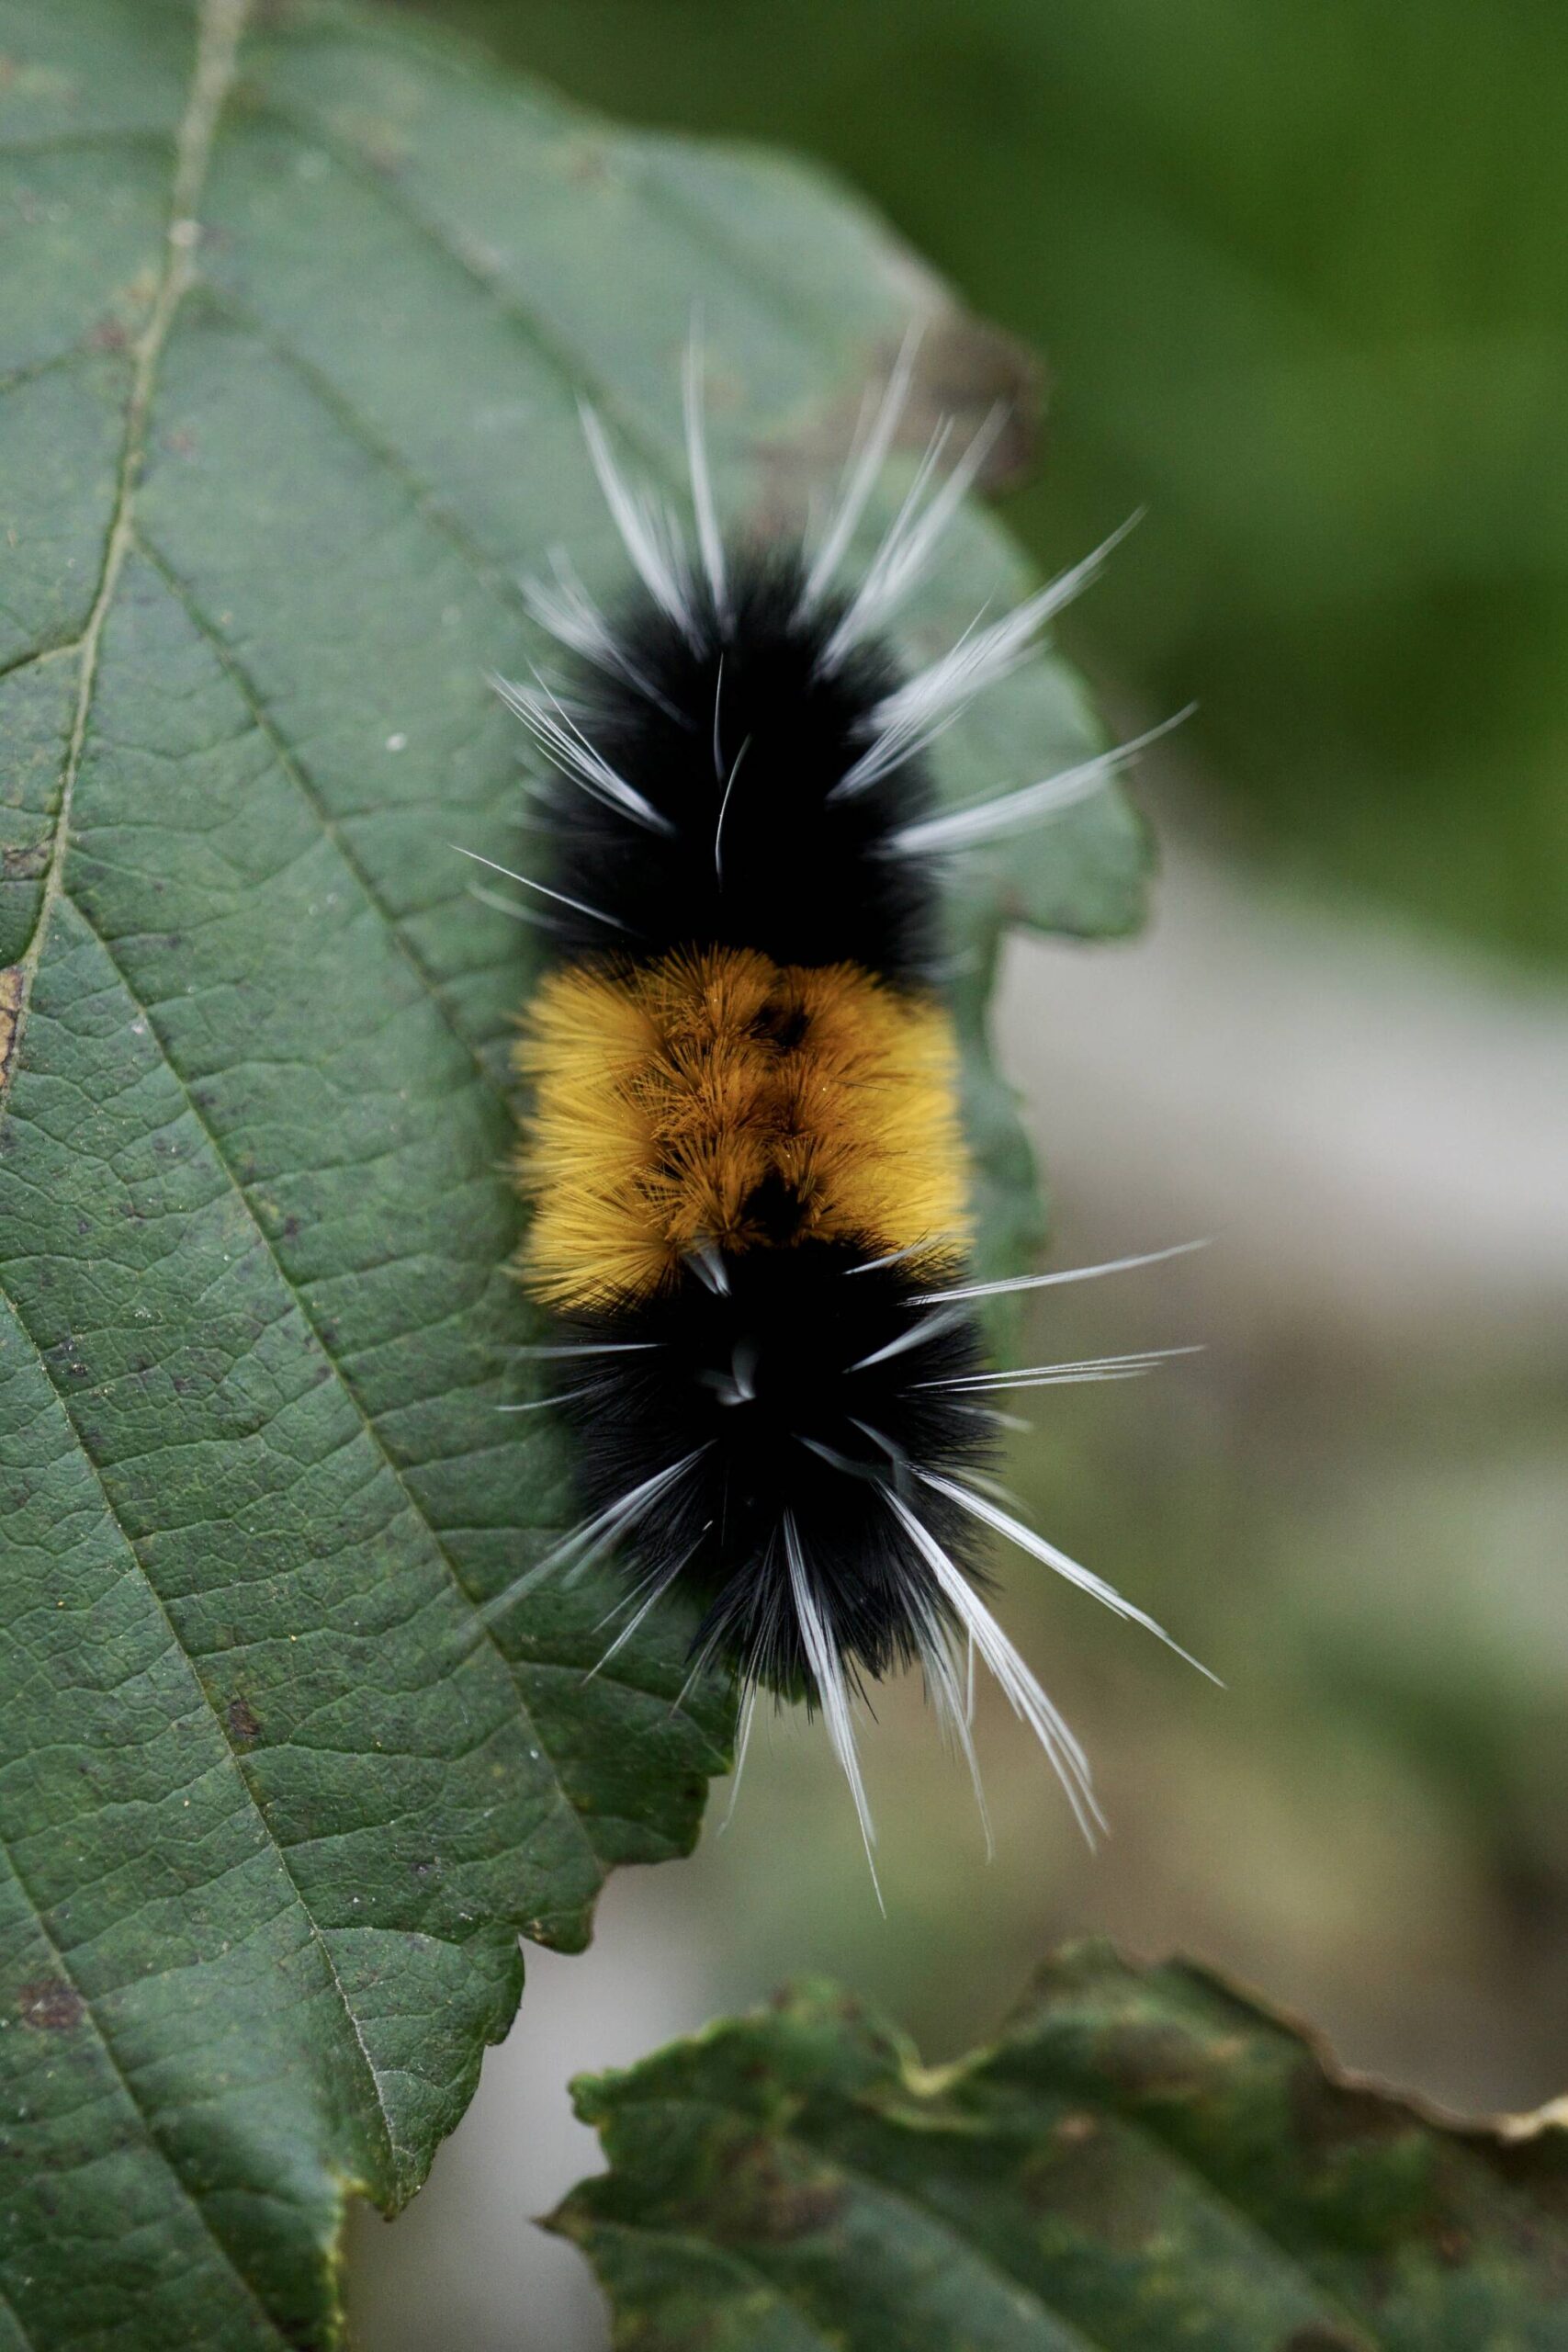 A fuzzy caterpillar munches on a leaf on Prince of Wales Island on Sept. 10. (Photo by Marti Crutcher)